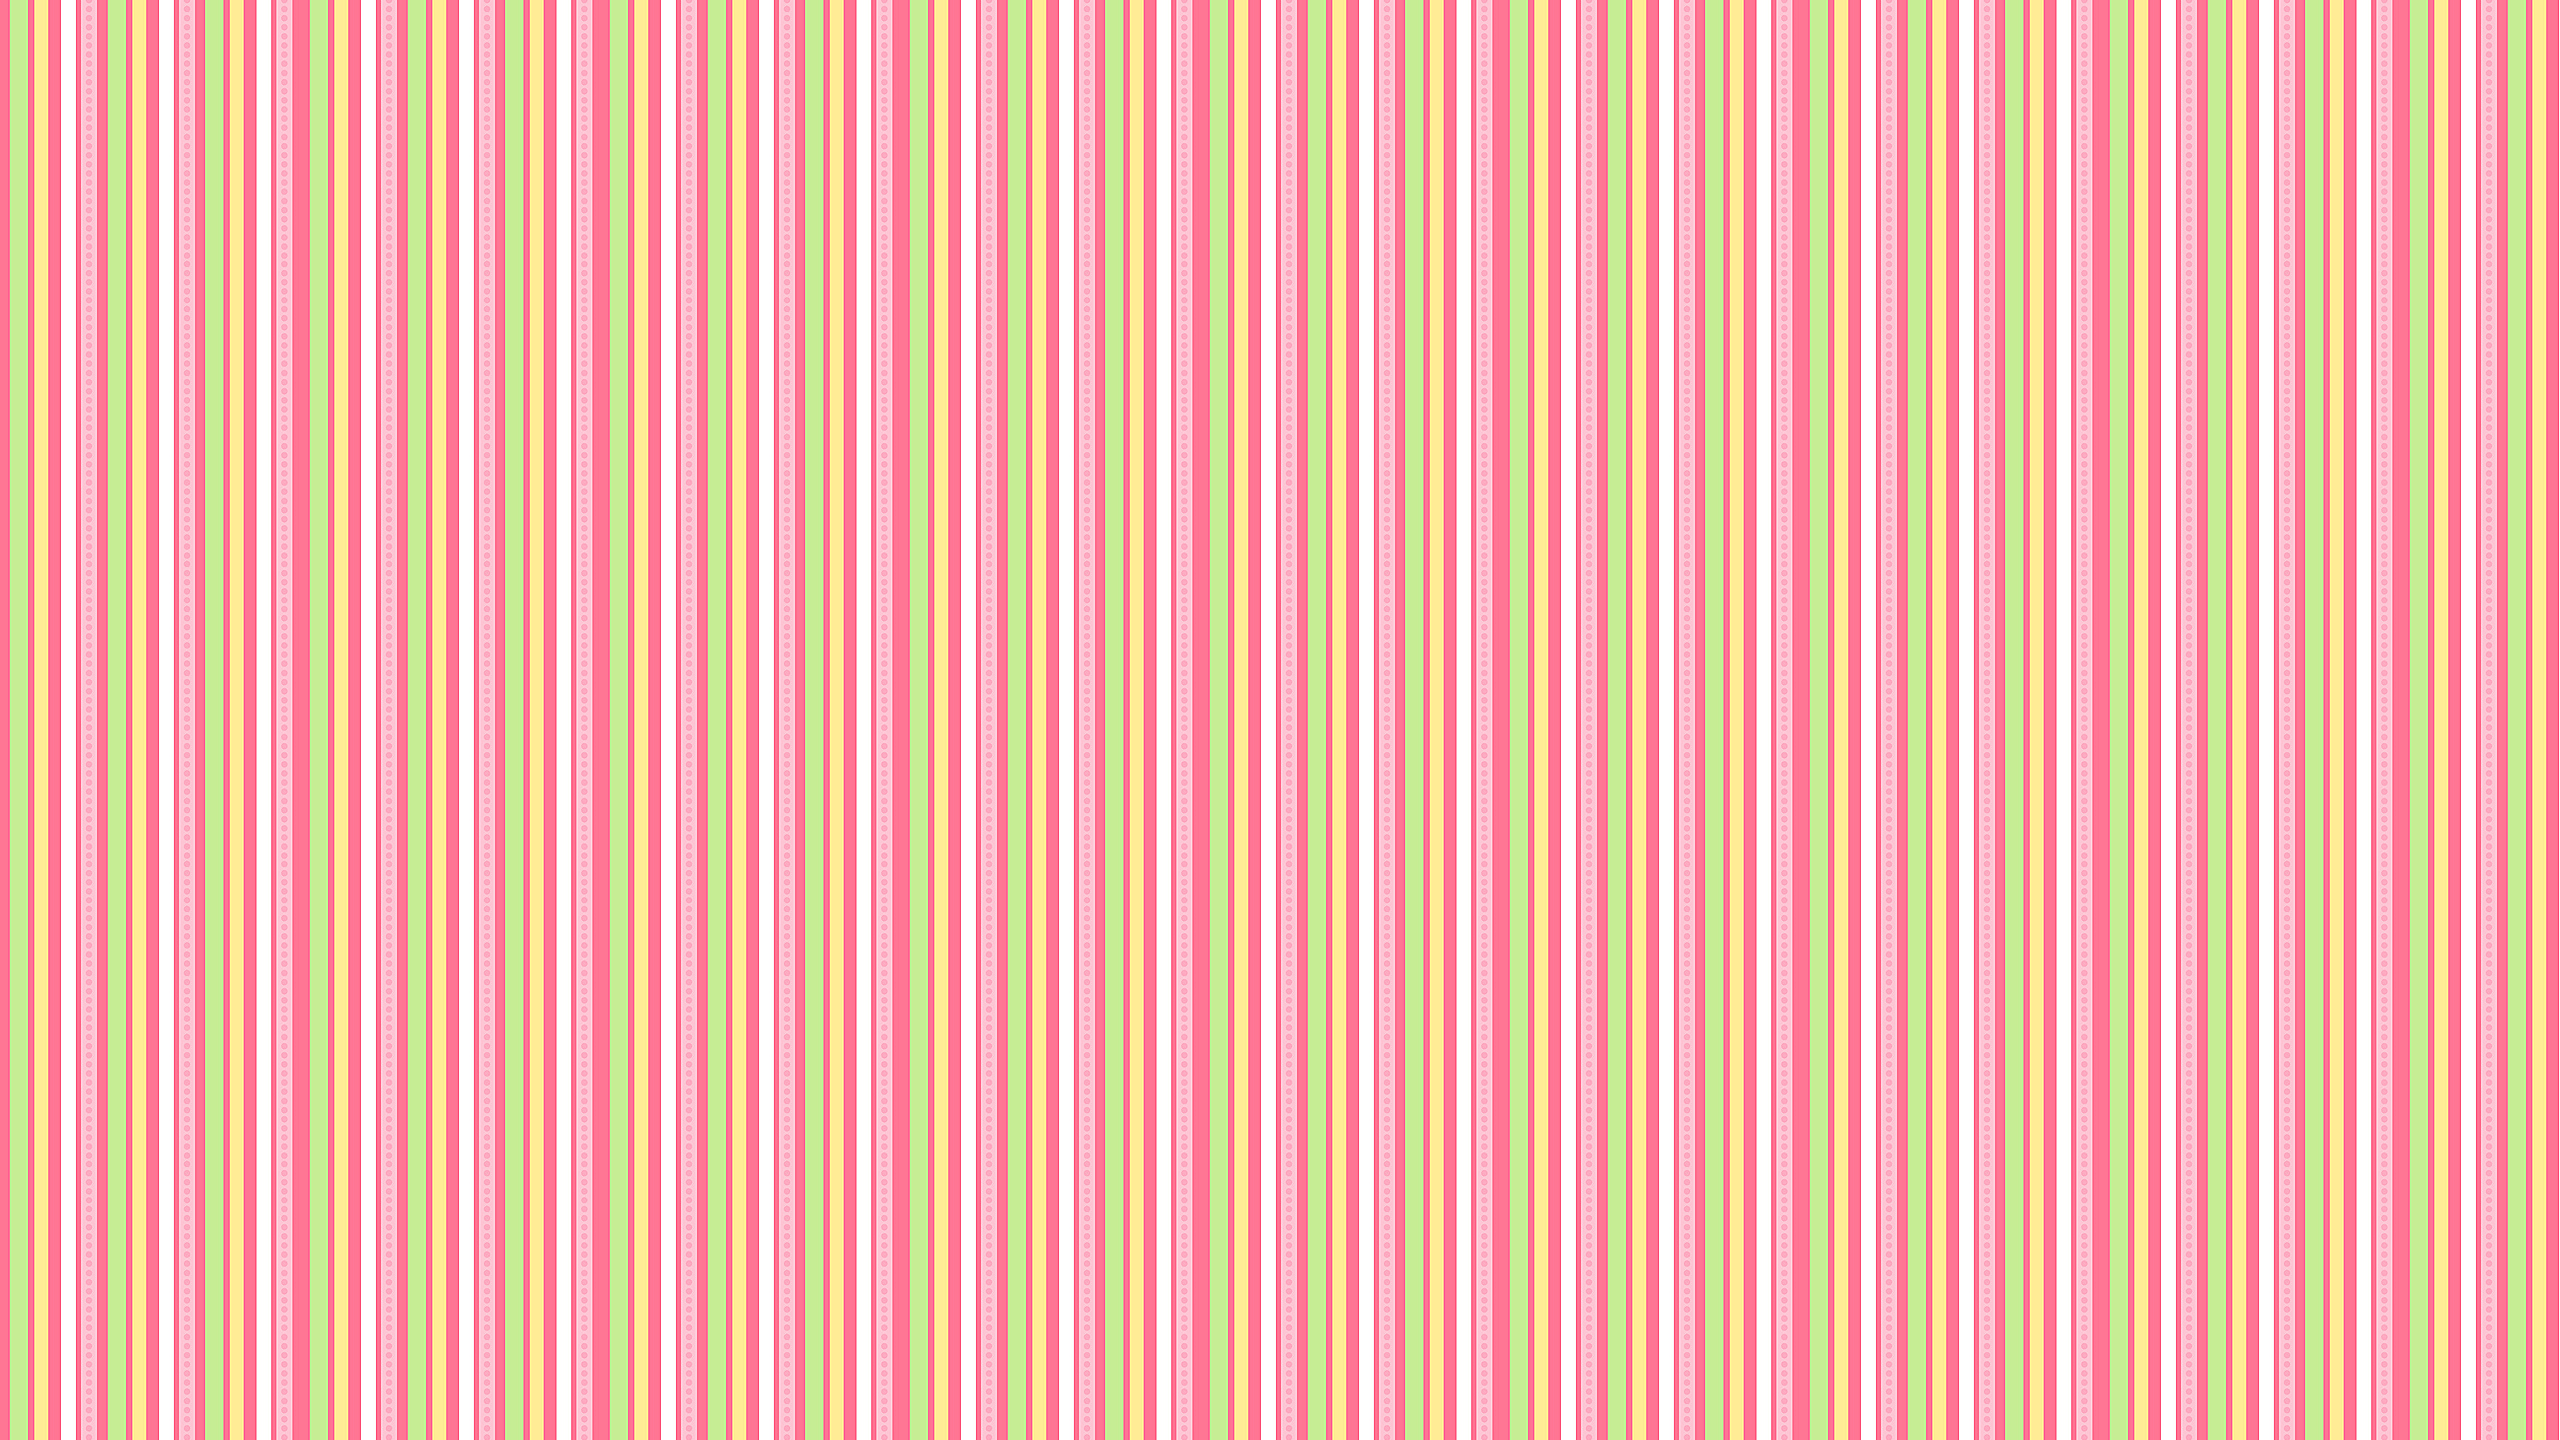 This Coral Stripes Desktop Wallpaper Is Easy Just Save The